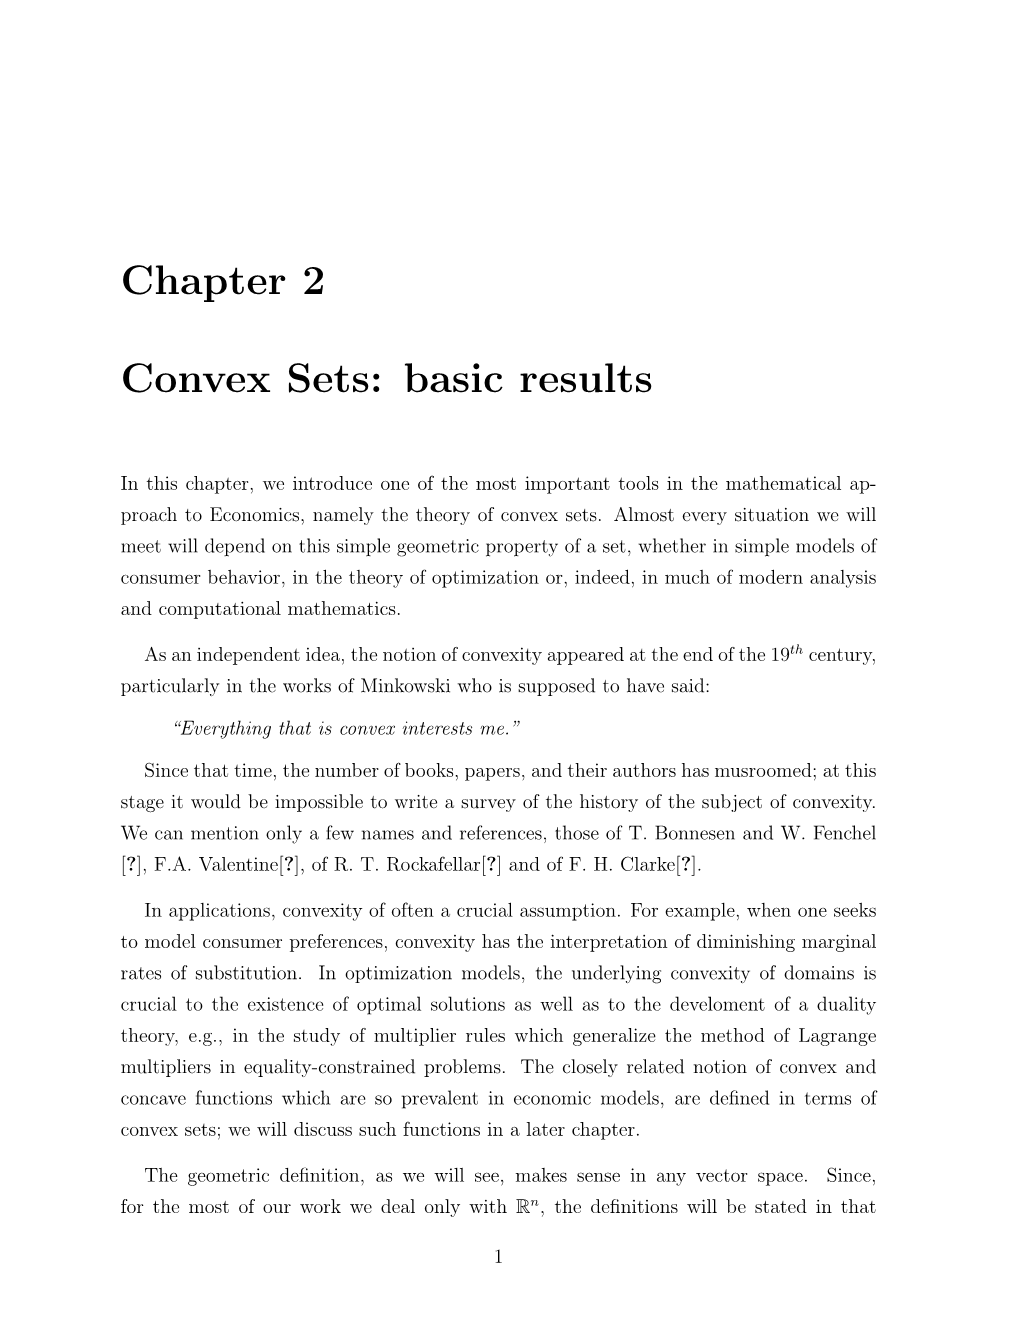 Chapter 2 Convex Sets: Basic Results